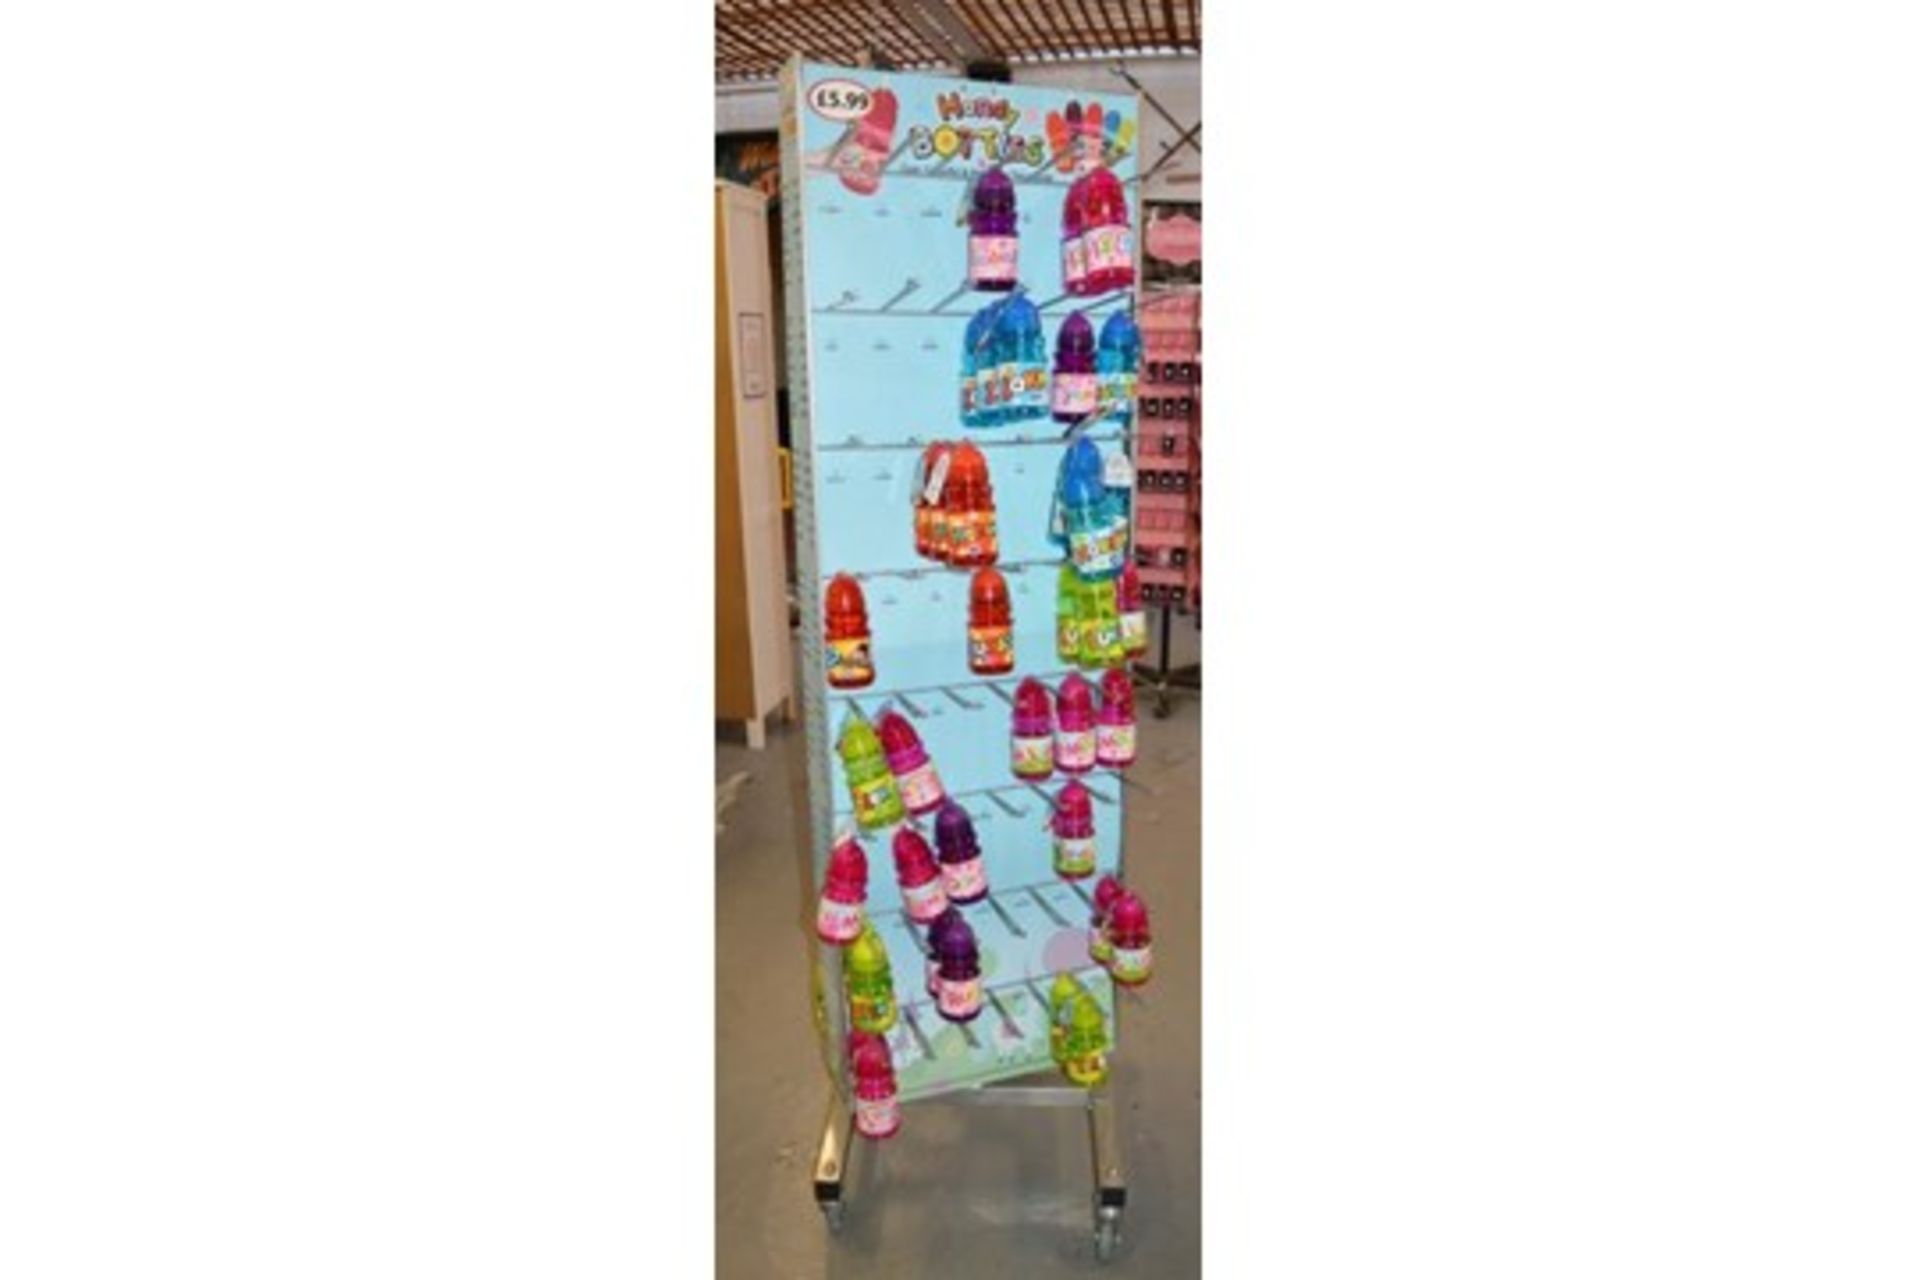 27 x Retail Carousel Display Stands With Approximately 2,800 Items of Resale Stock - Includes - Image 21 of 61